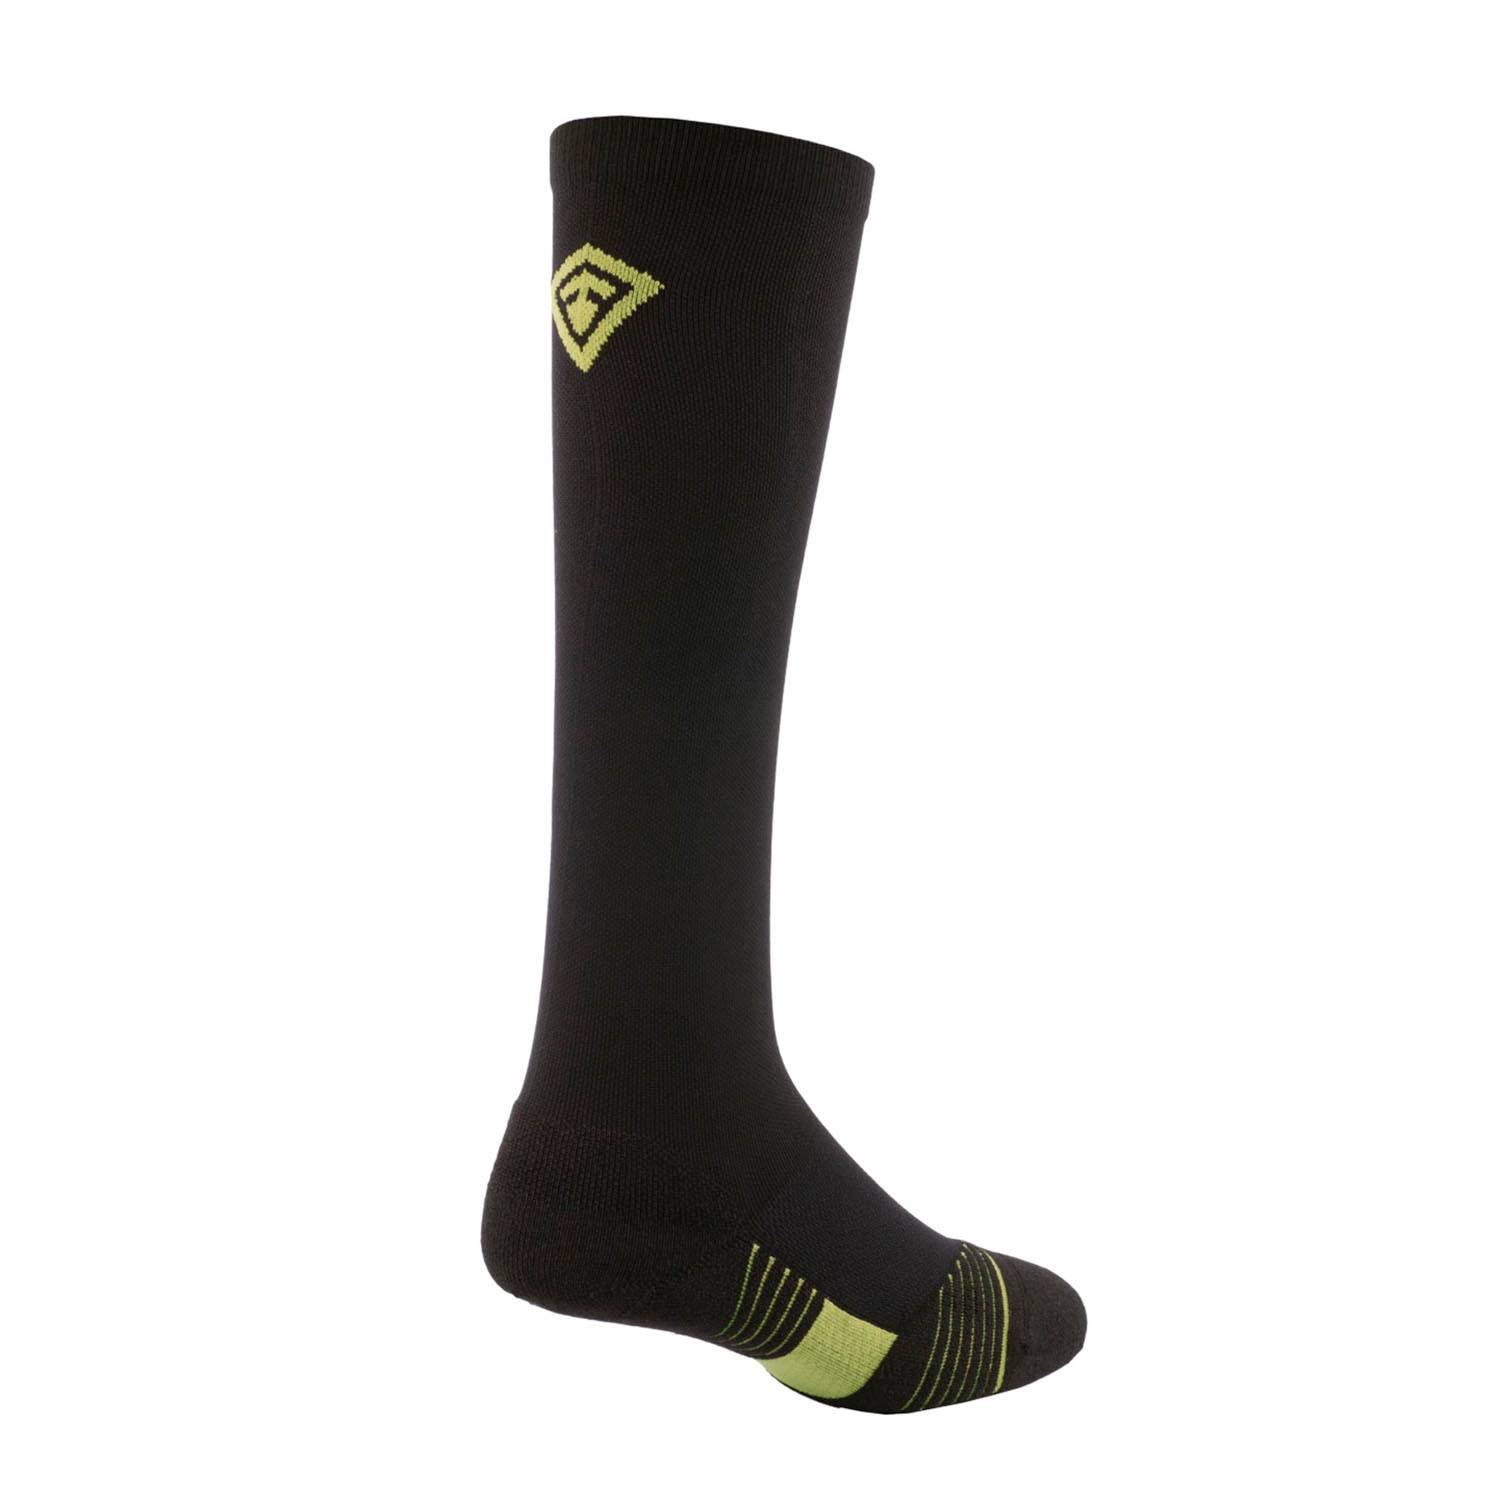 FIRST TACTICAL ADVANCED FIT DUTY SOCKS